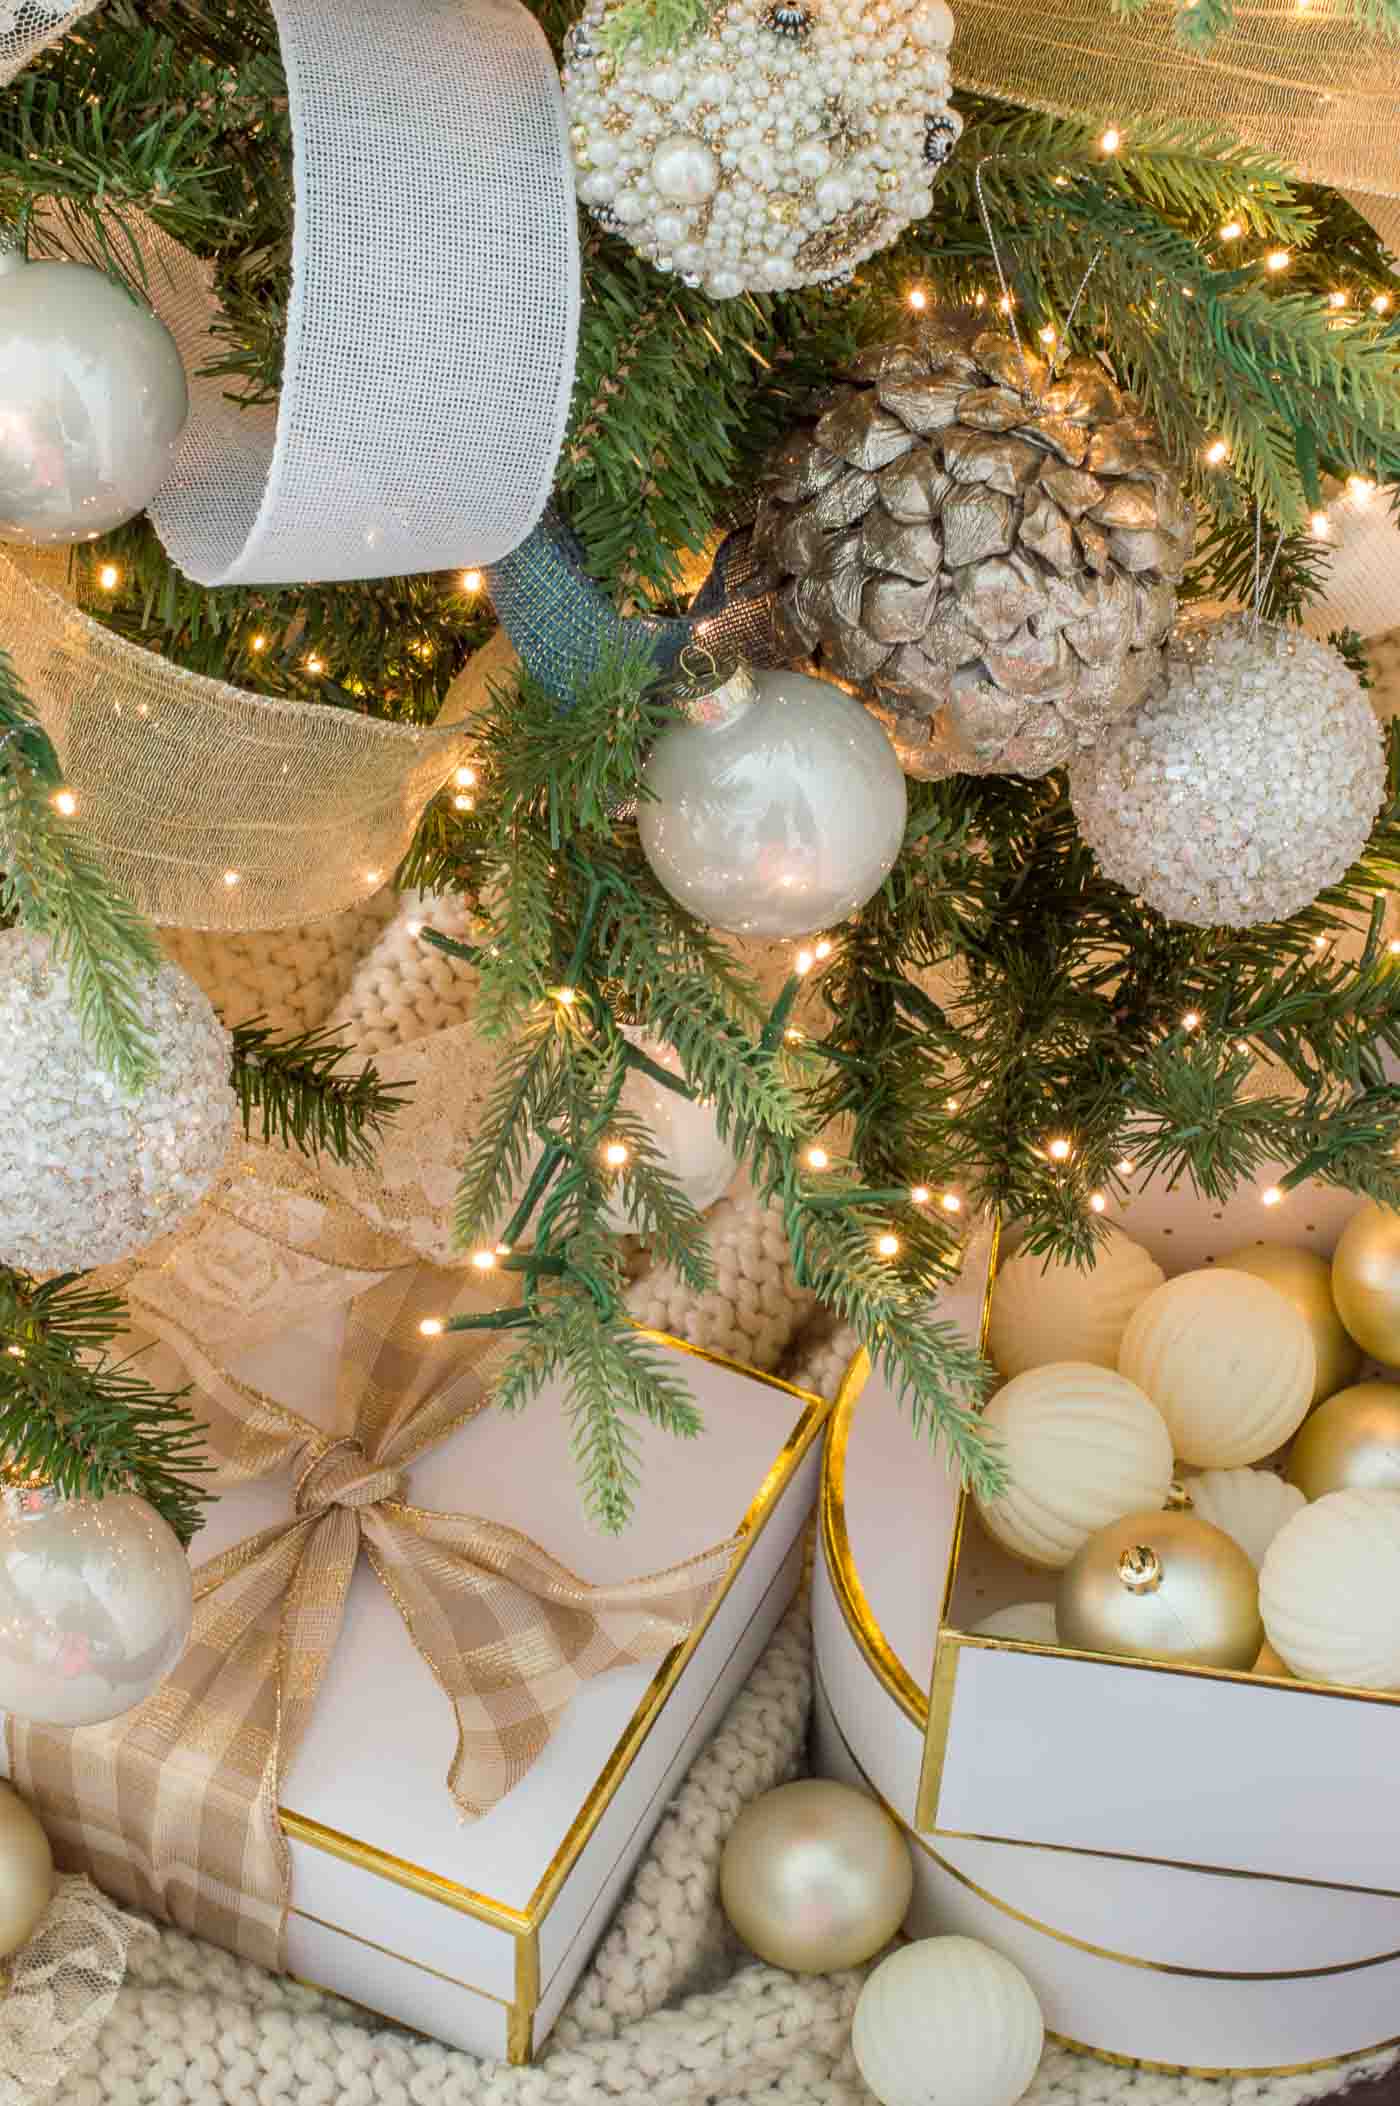 How to Position and Style Gifts Under a Christmas Tree